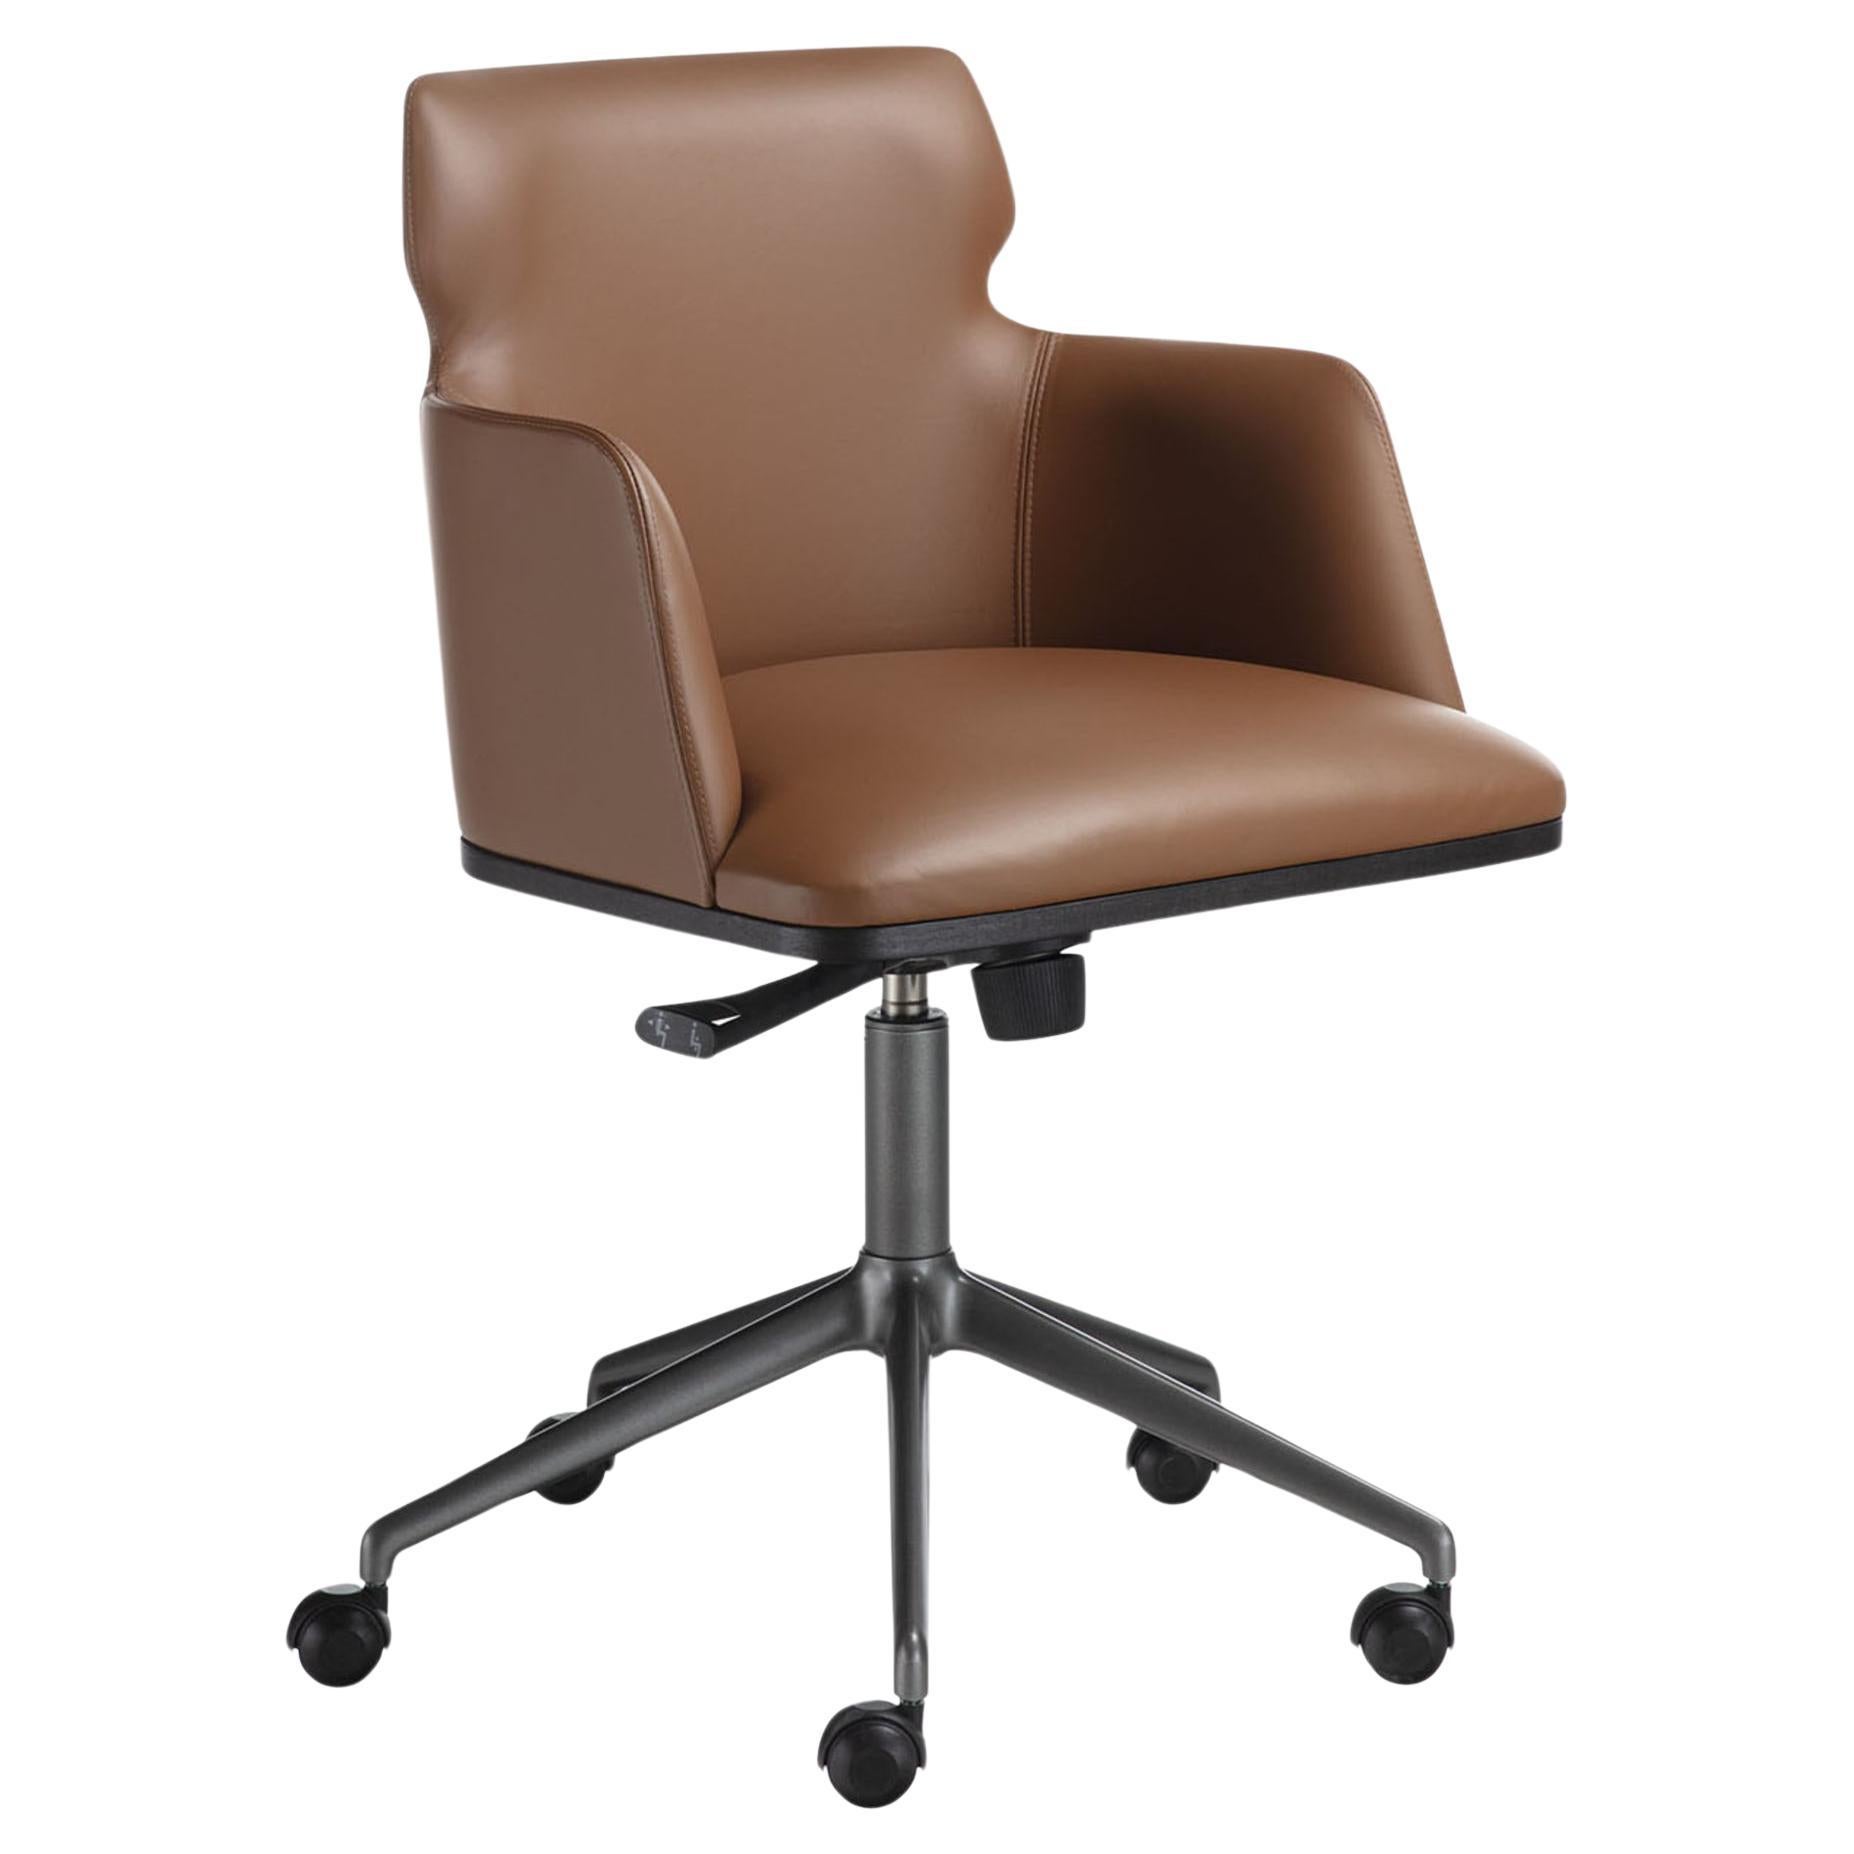 Shape Leather Swivel Chair For Sale